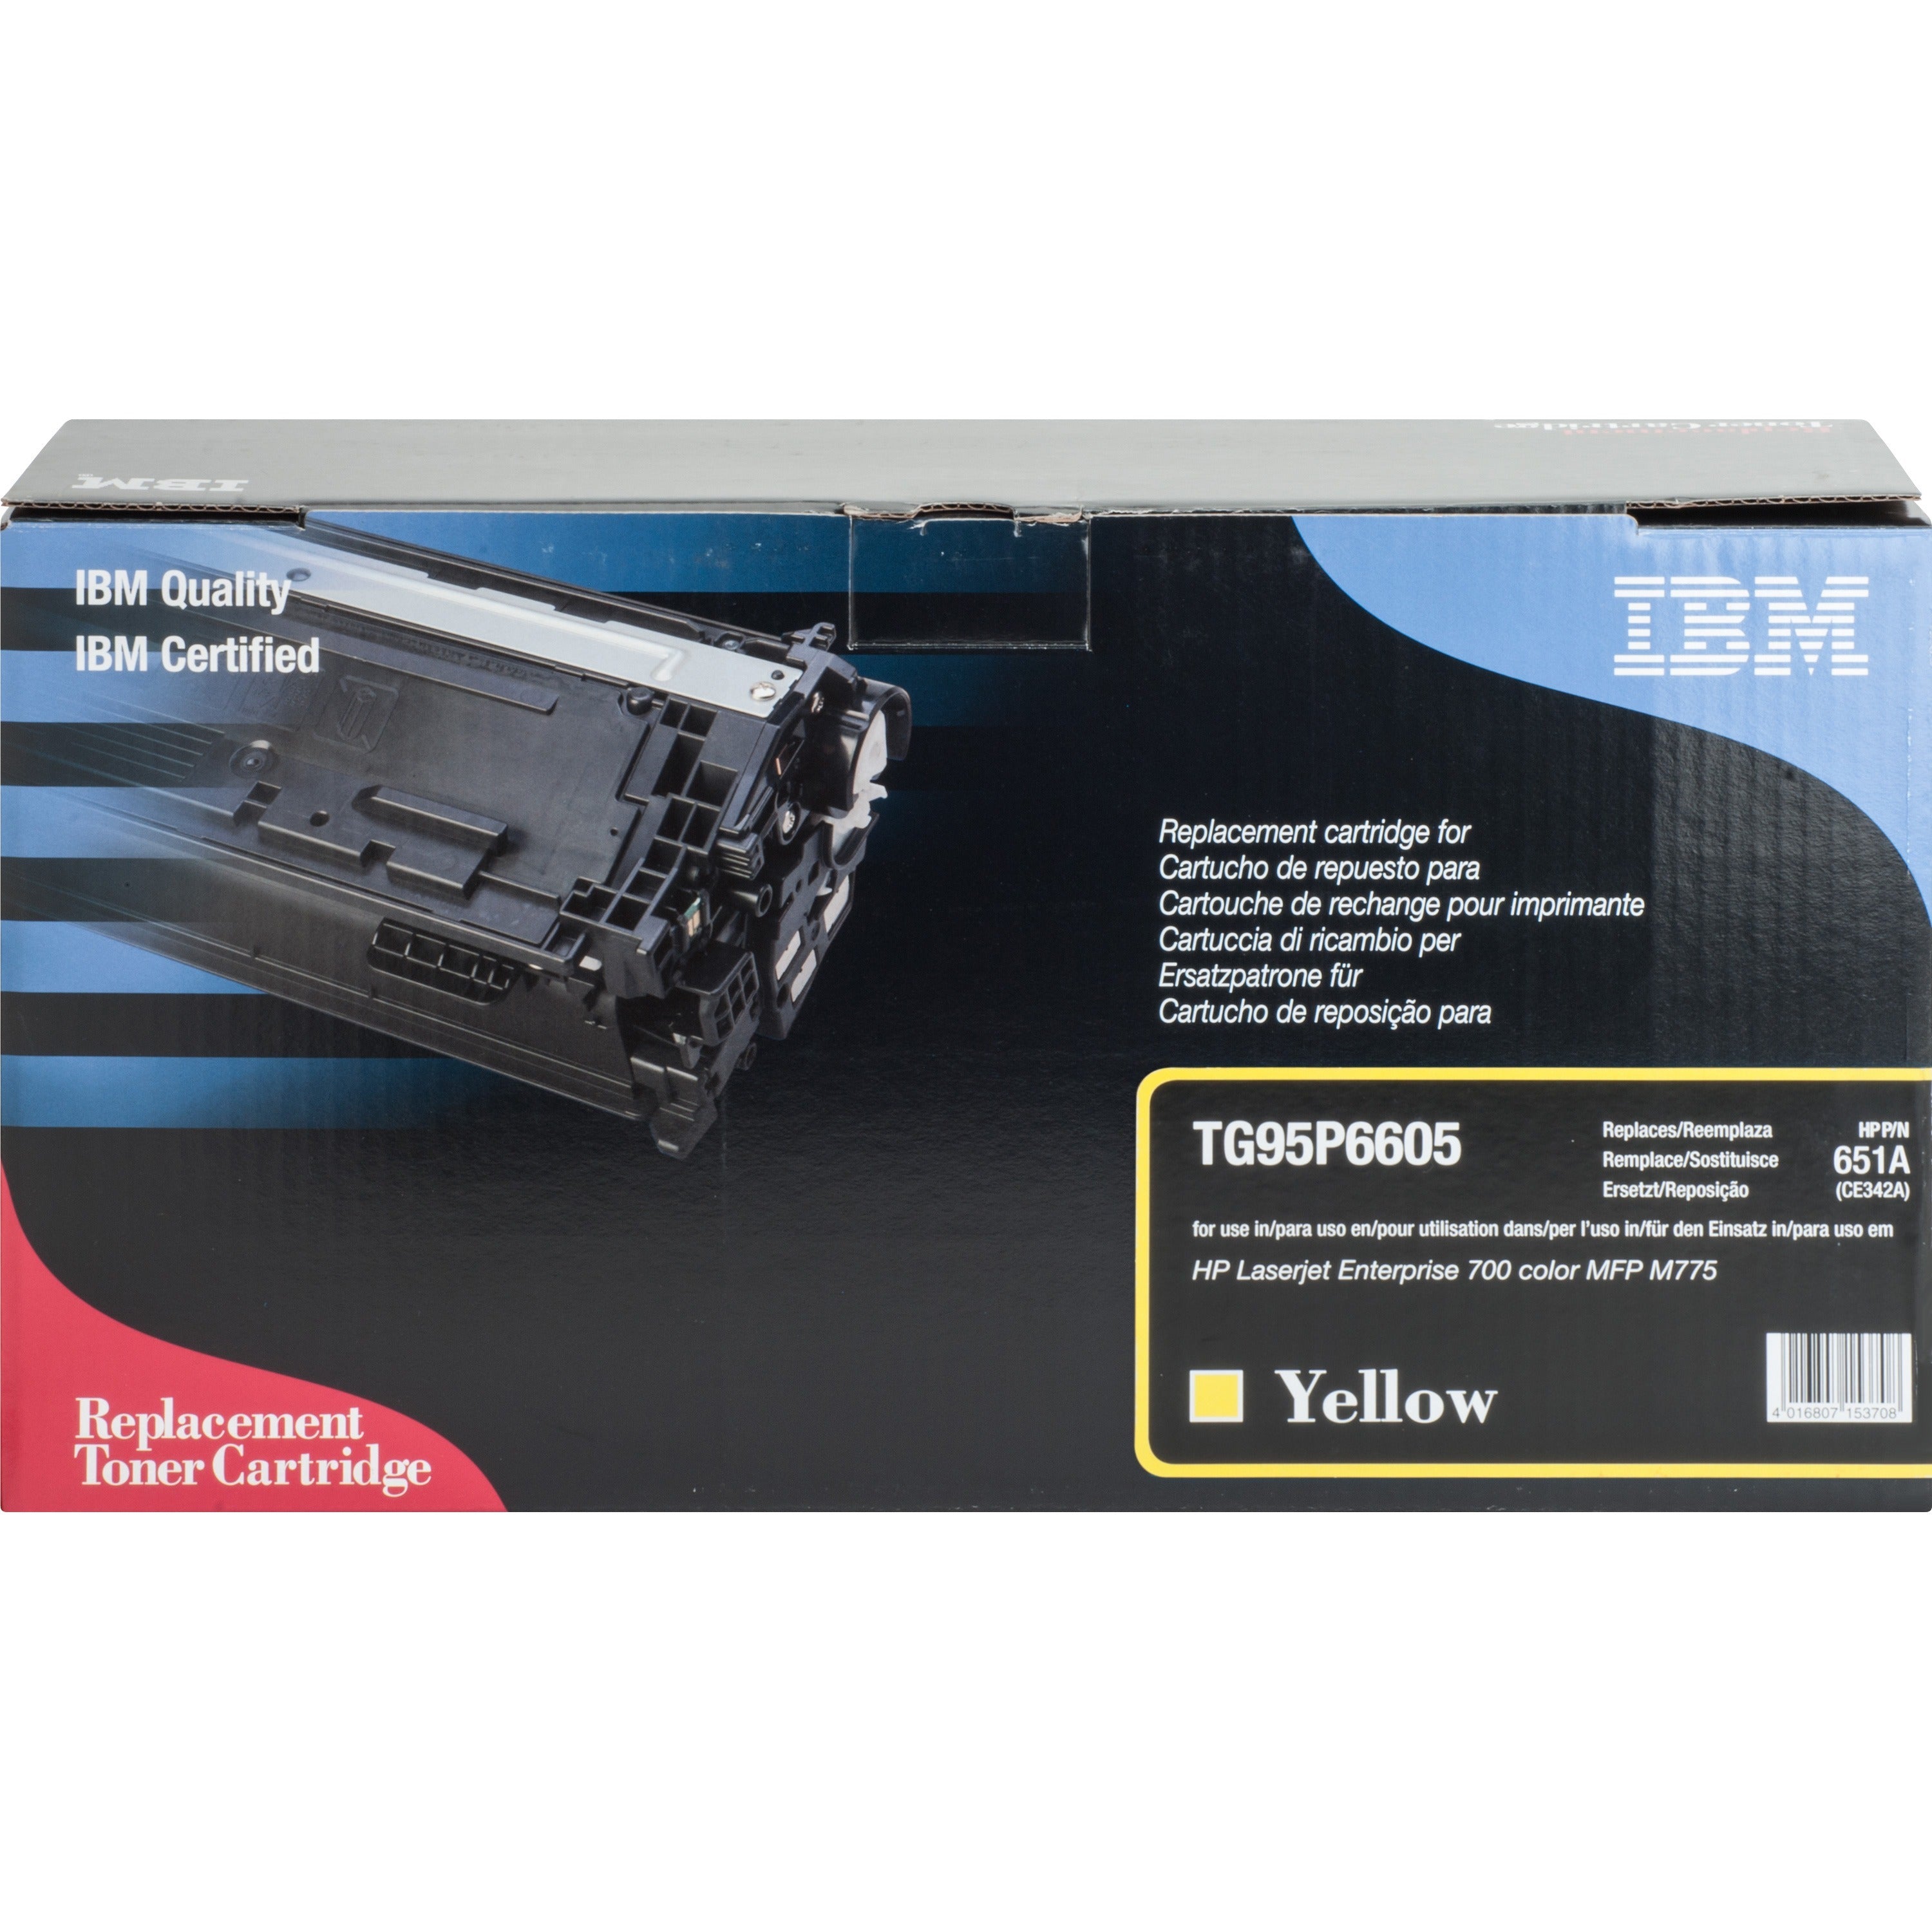 ibm-remanufactured-toner-cartridge-alternative-for-hp-651a-ce342a-laser-16000-pages-yellow-1-each_ibmtg95p6605 - 1